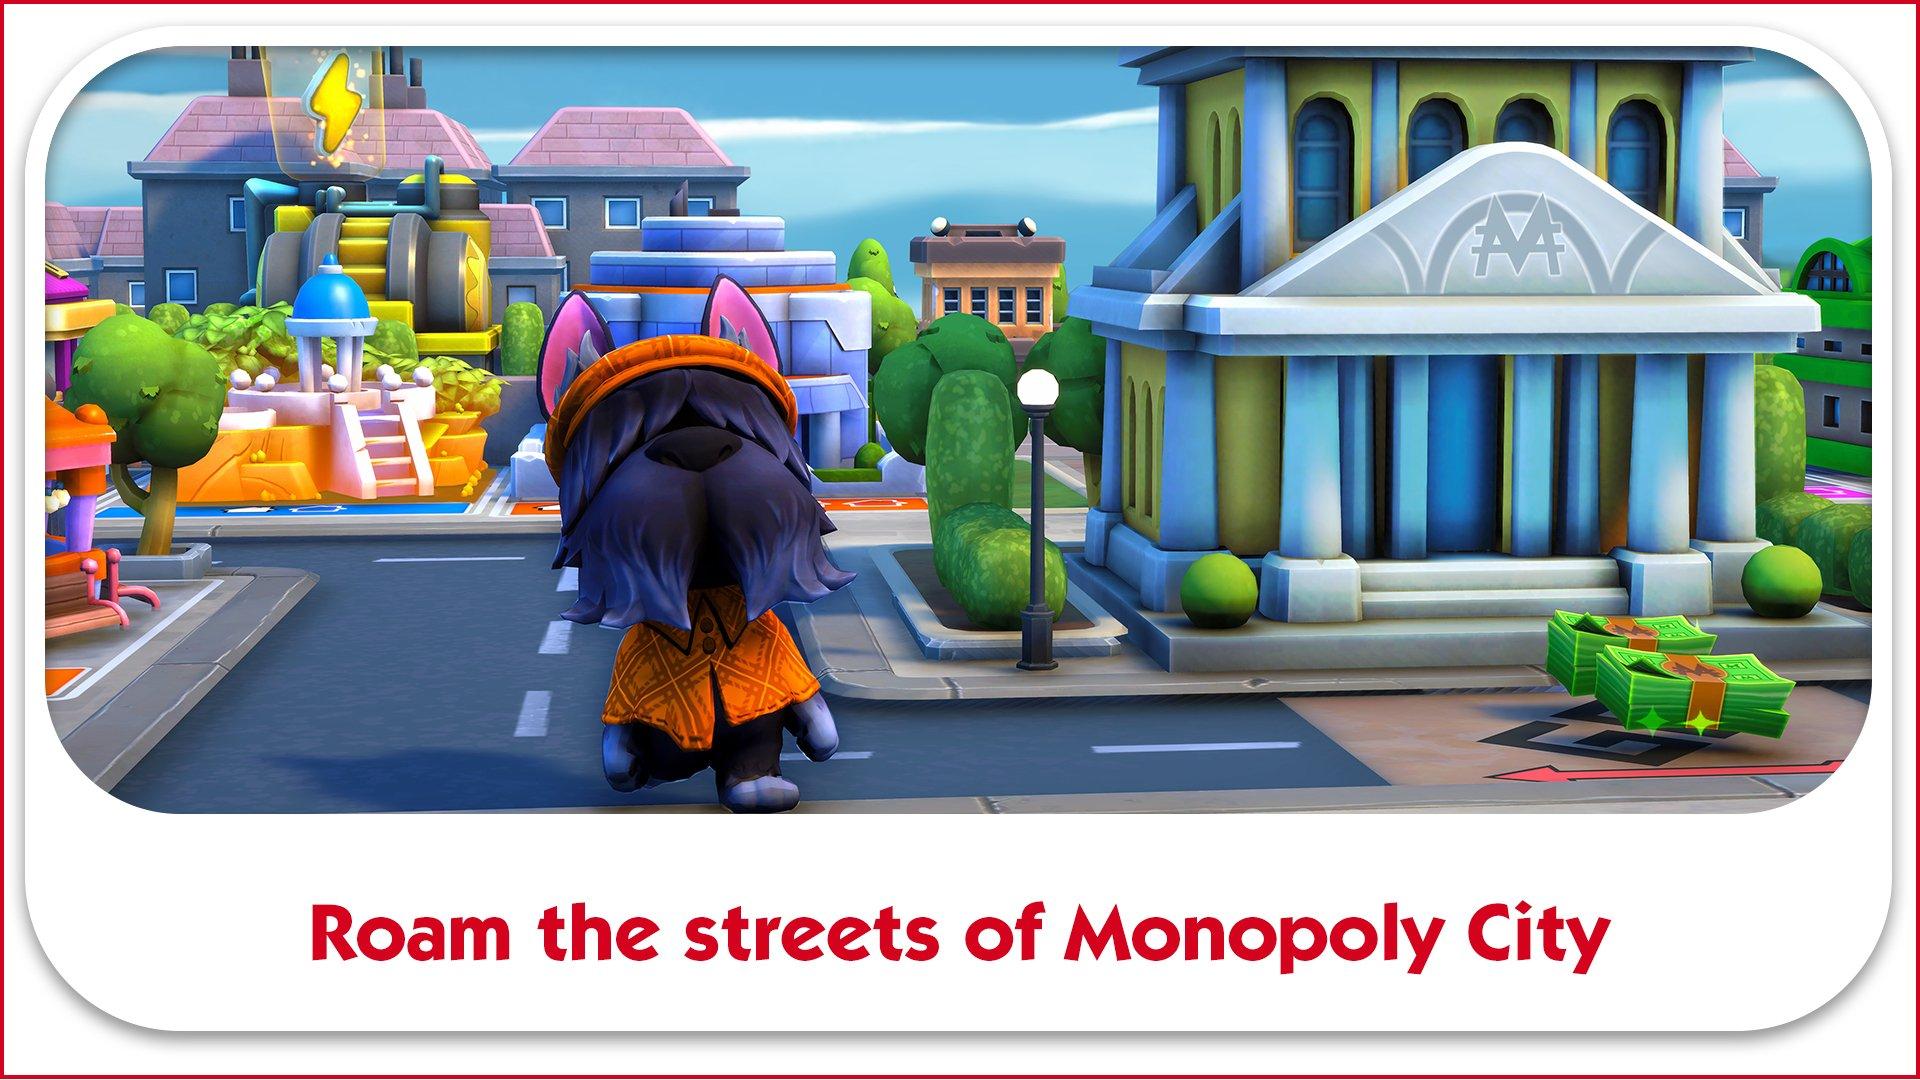 Nintendo Switch Game Deals - MONOPOLY + MONOPOLY Madness - Support